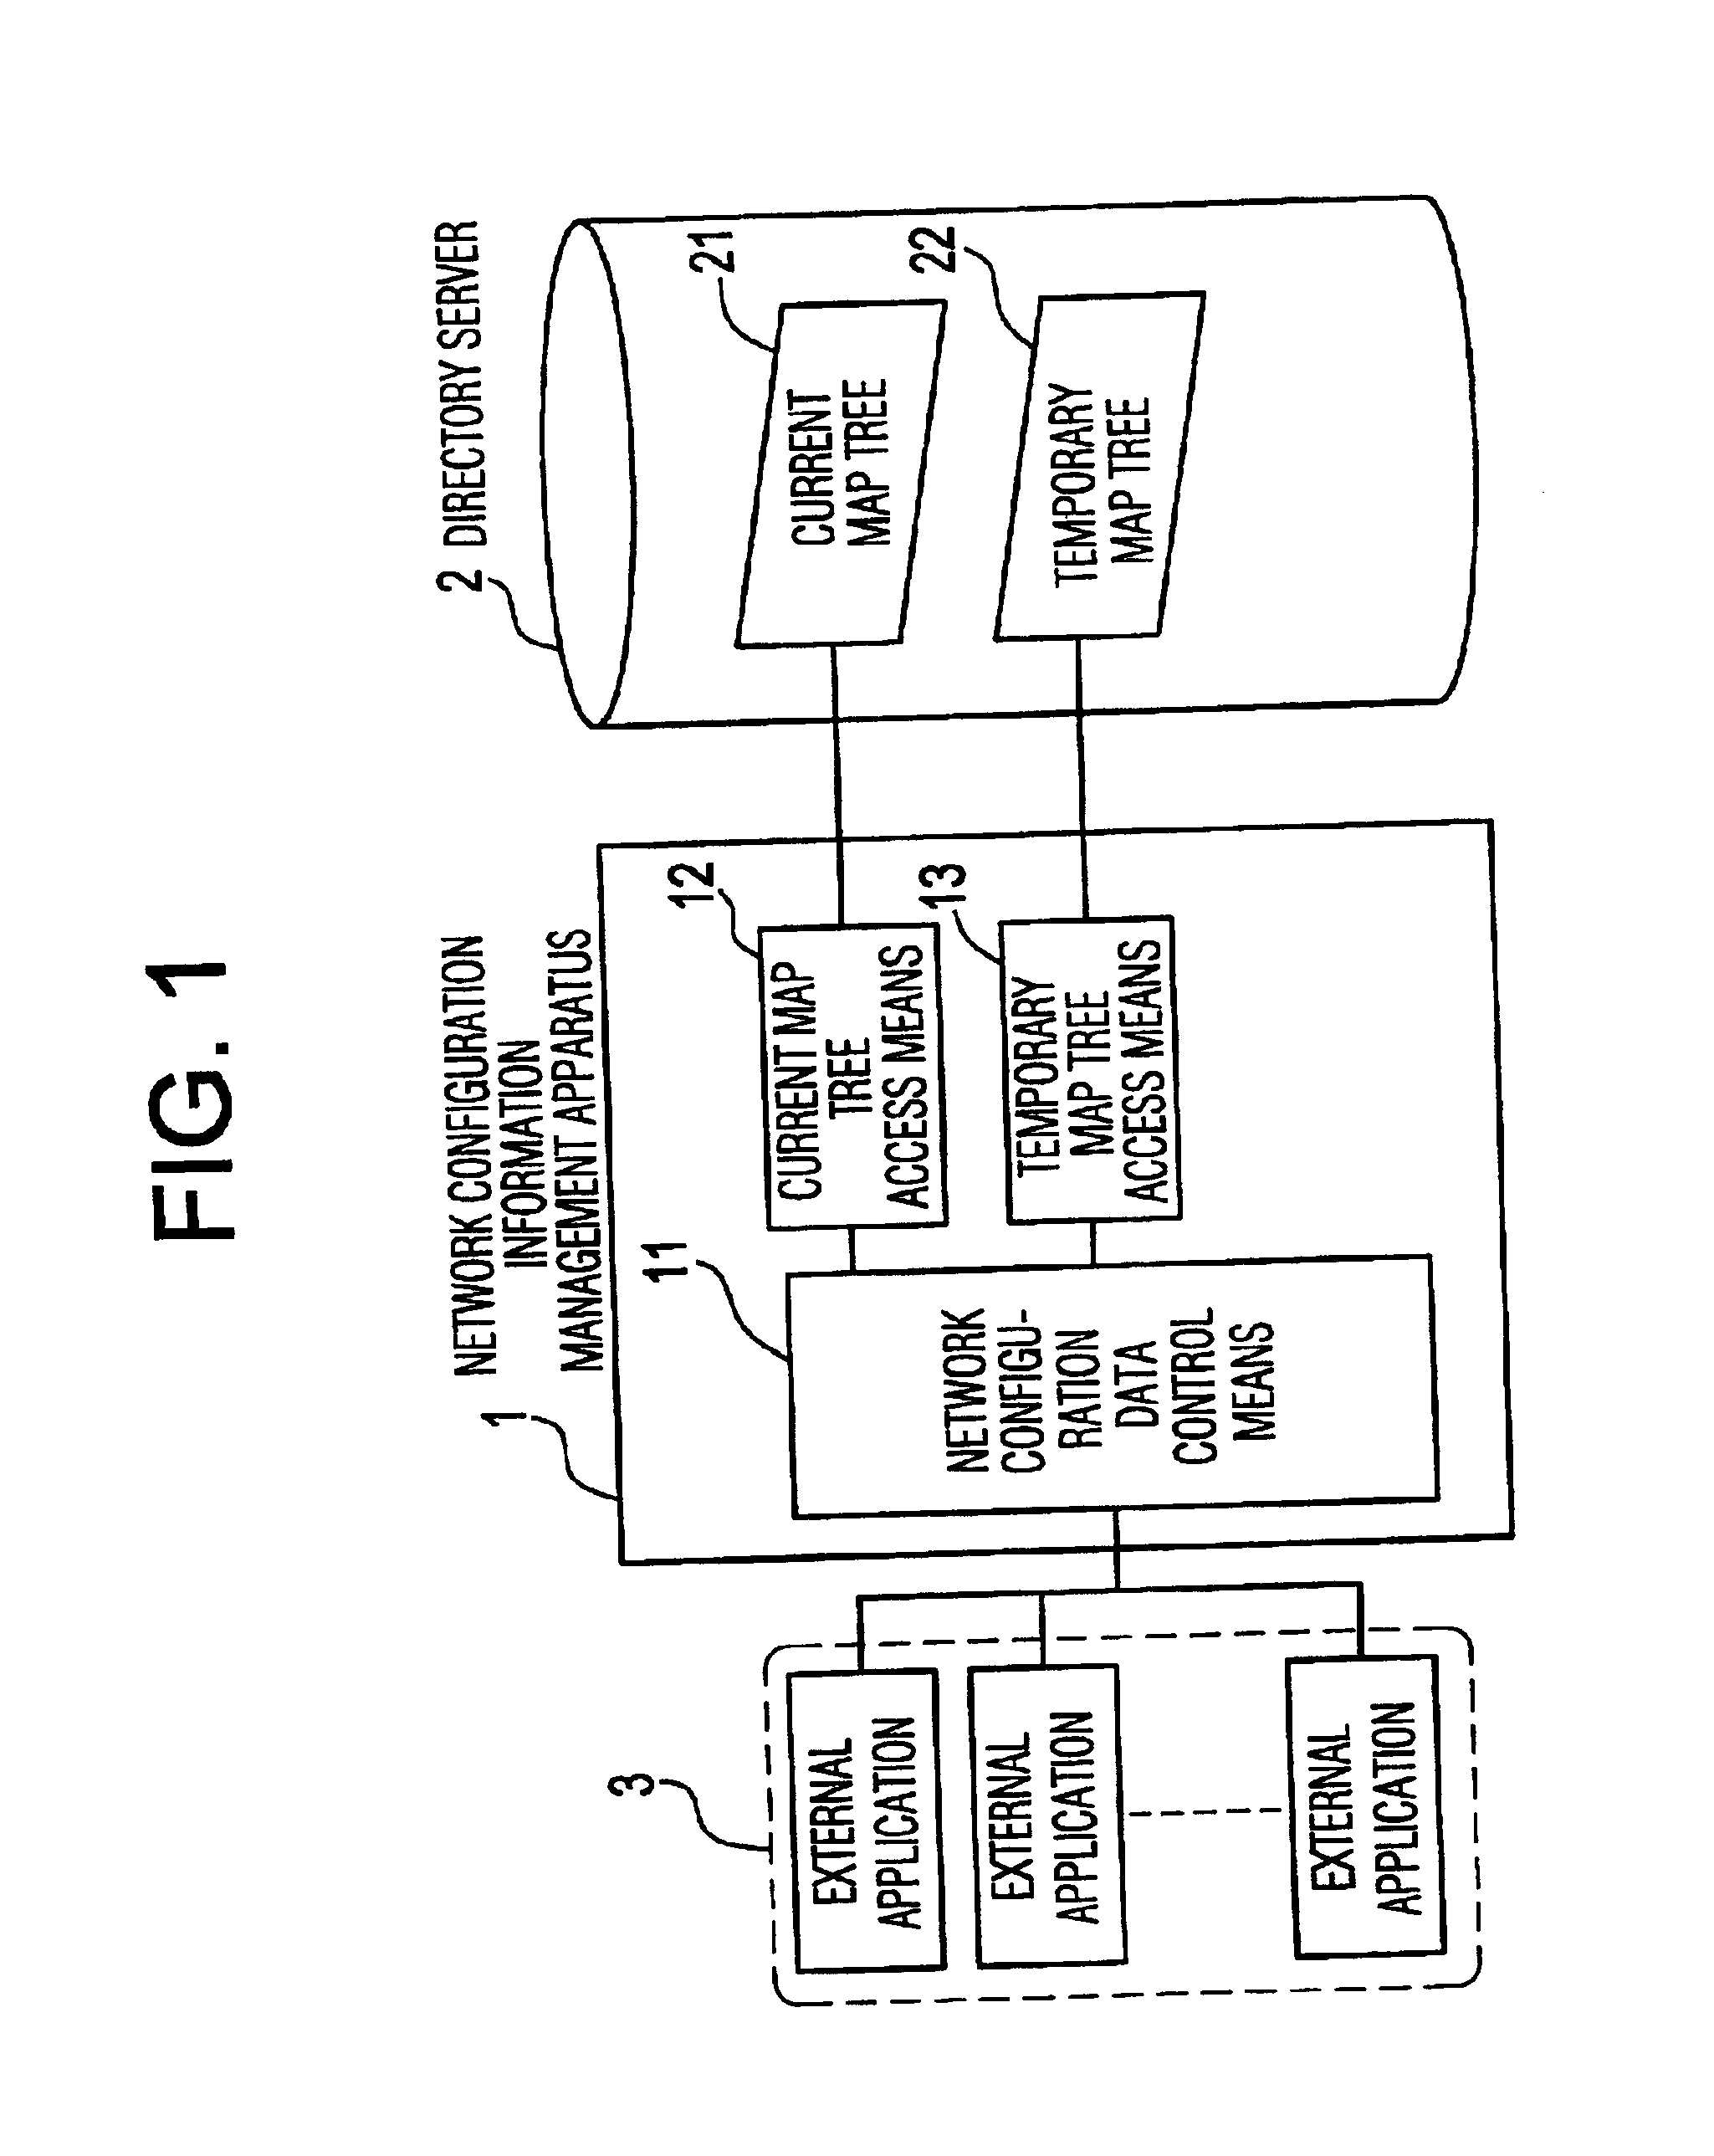 System and method for deriving future network configuration data from the current and previous network configuration data